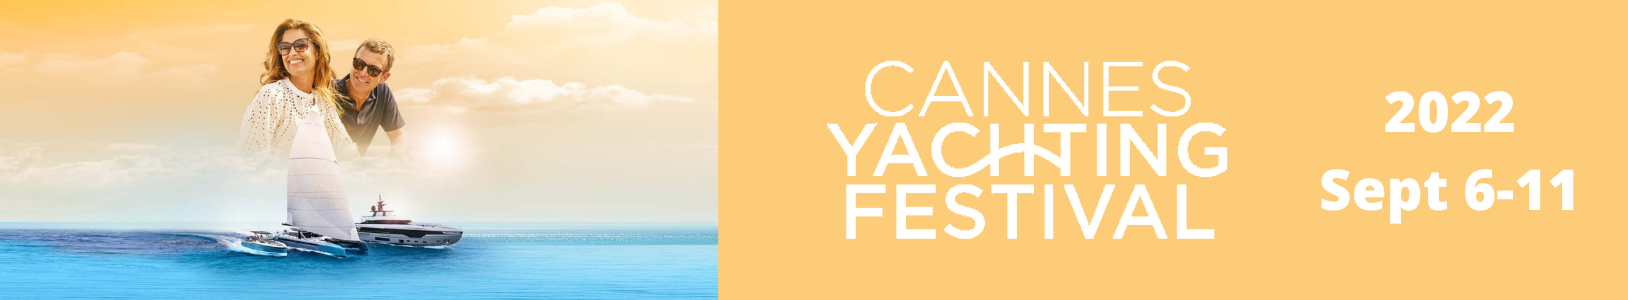 cannes-yachting-festival-boat-test.png